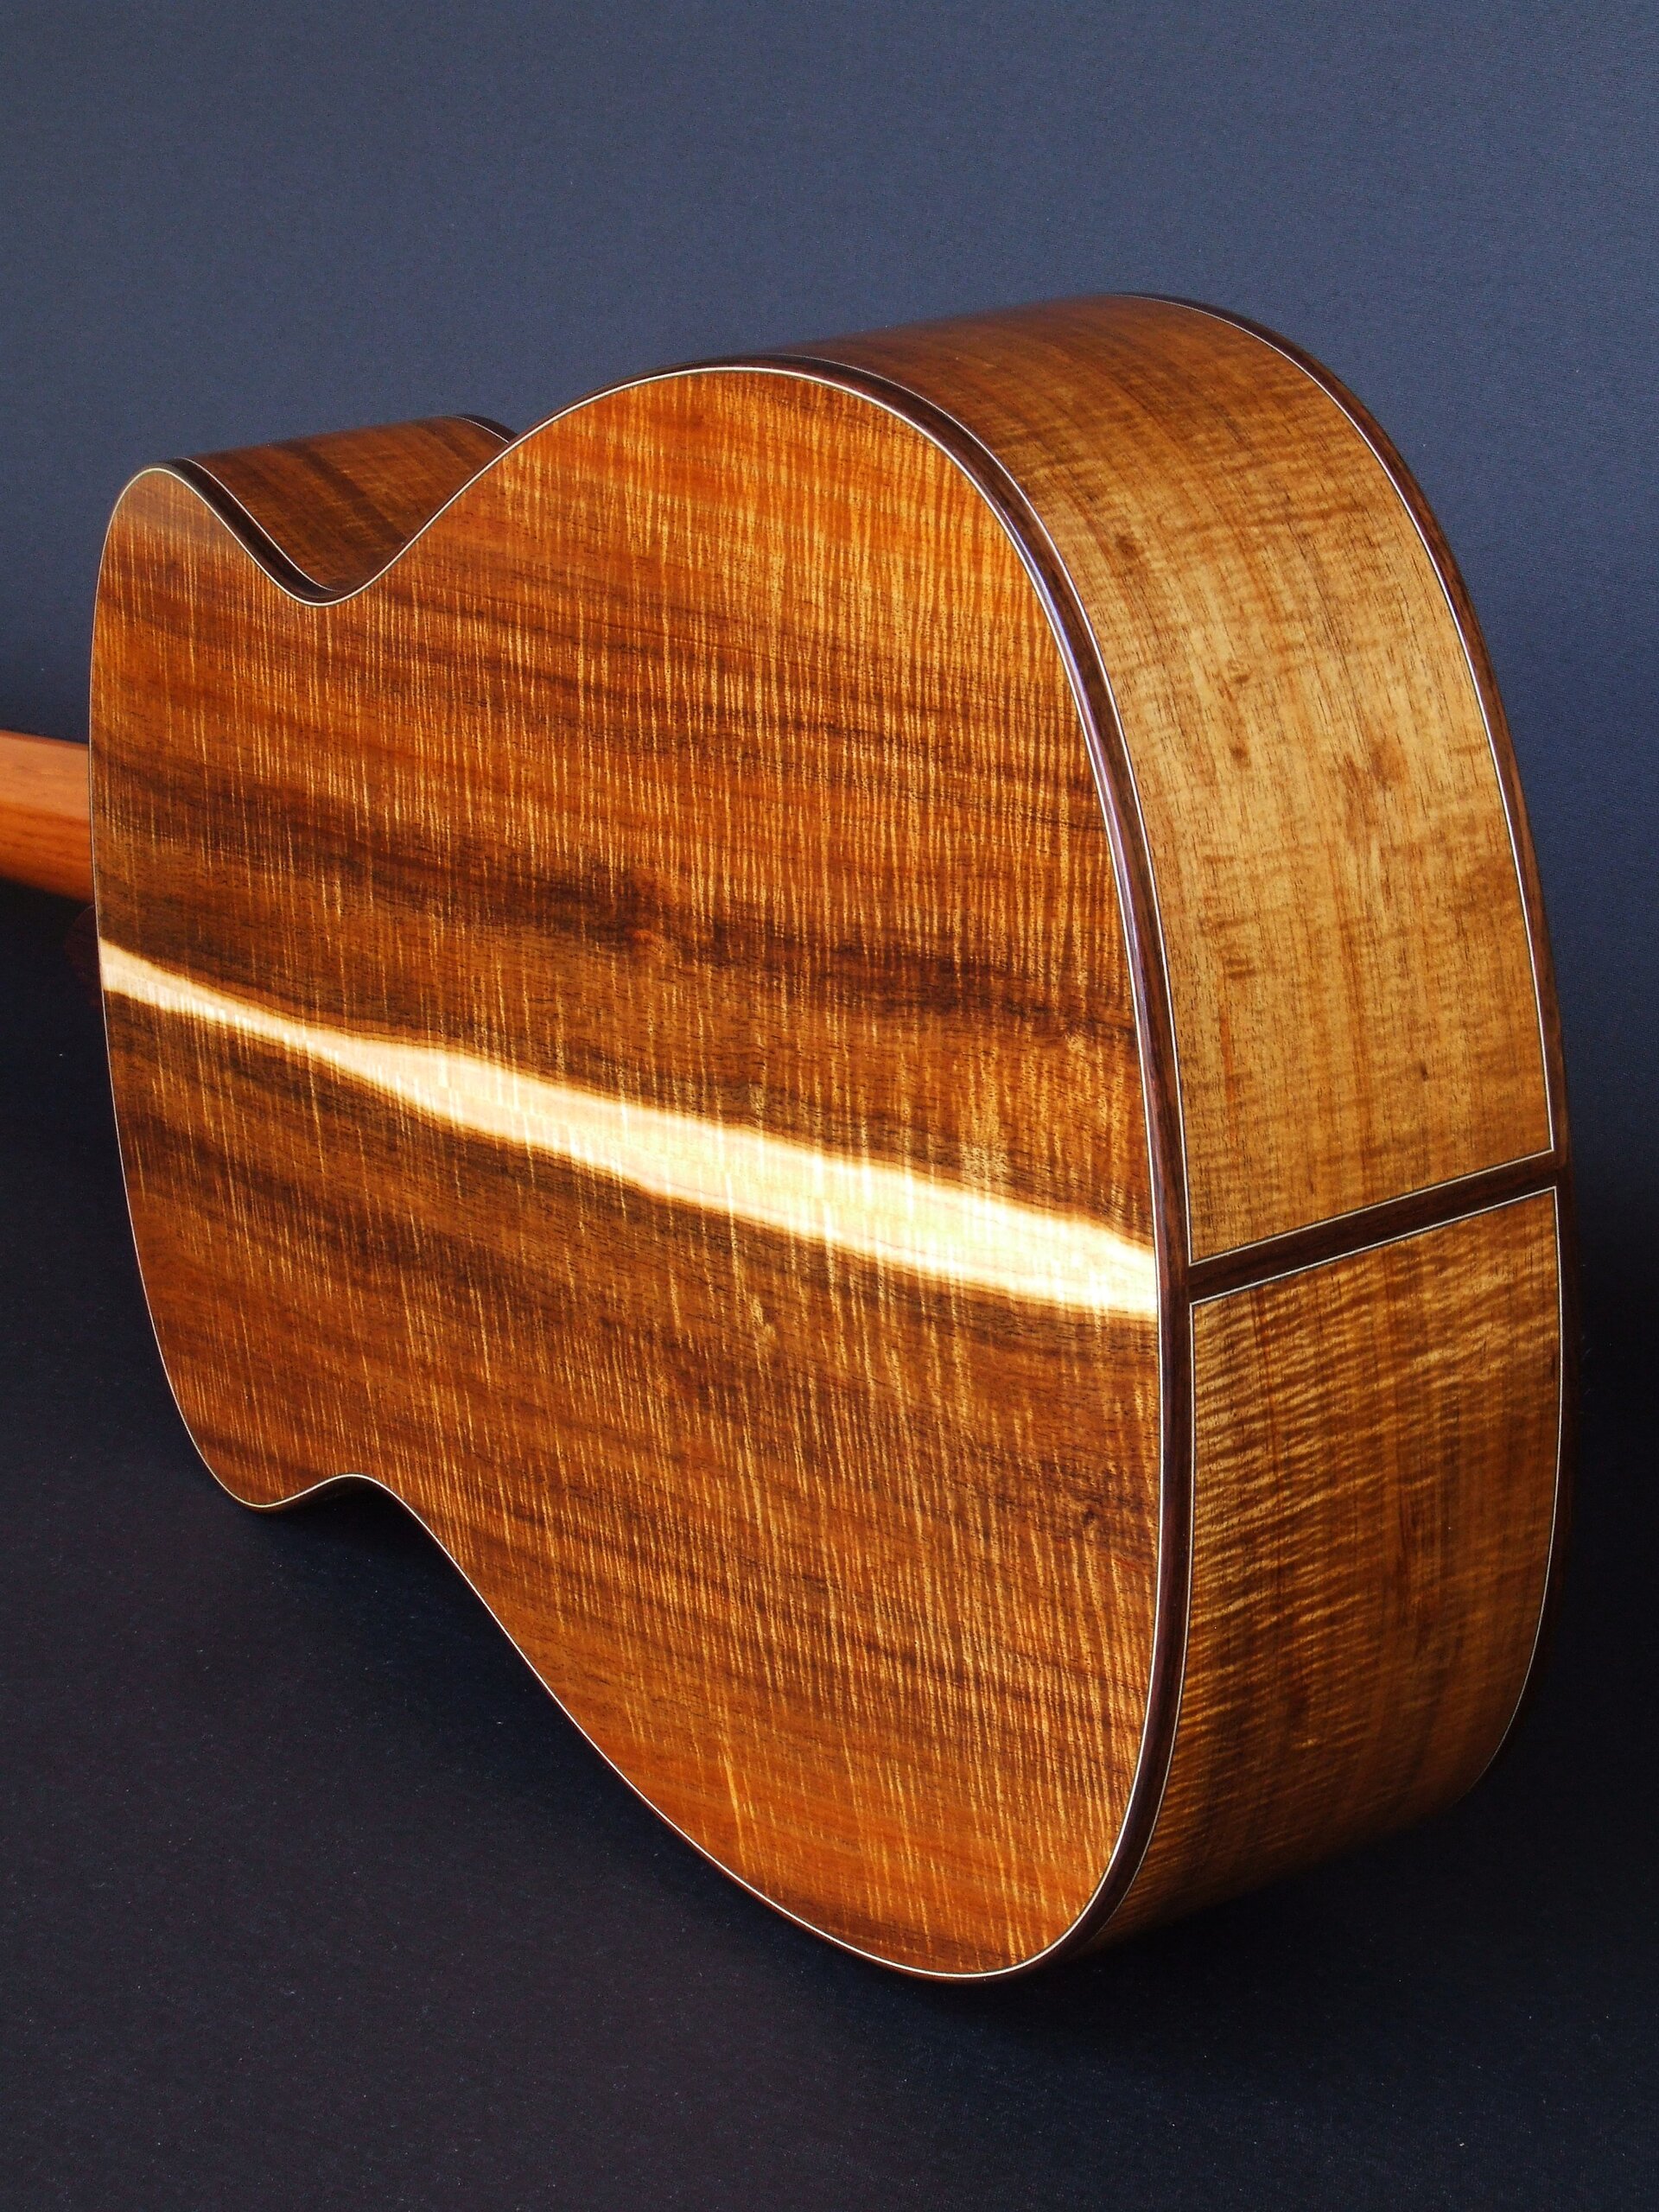 Custom guitars. The back and sides of a guitar made with highly figured Australian Blackwood